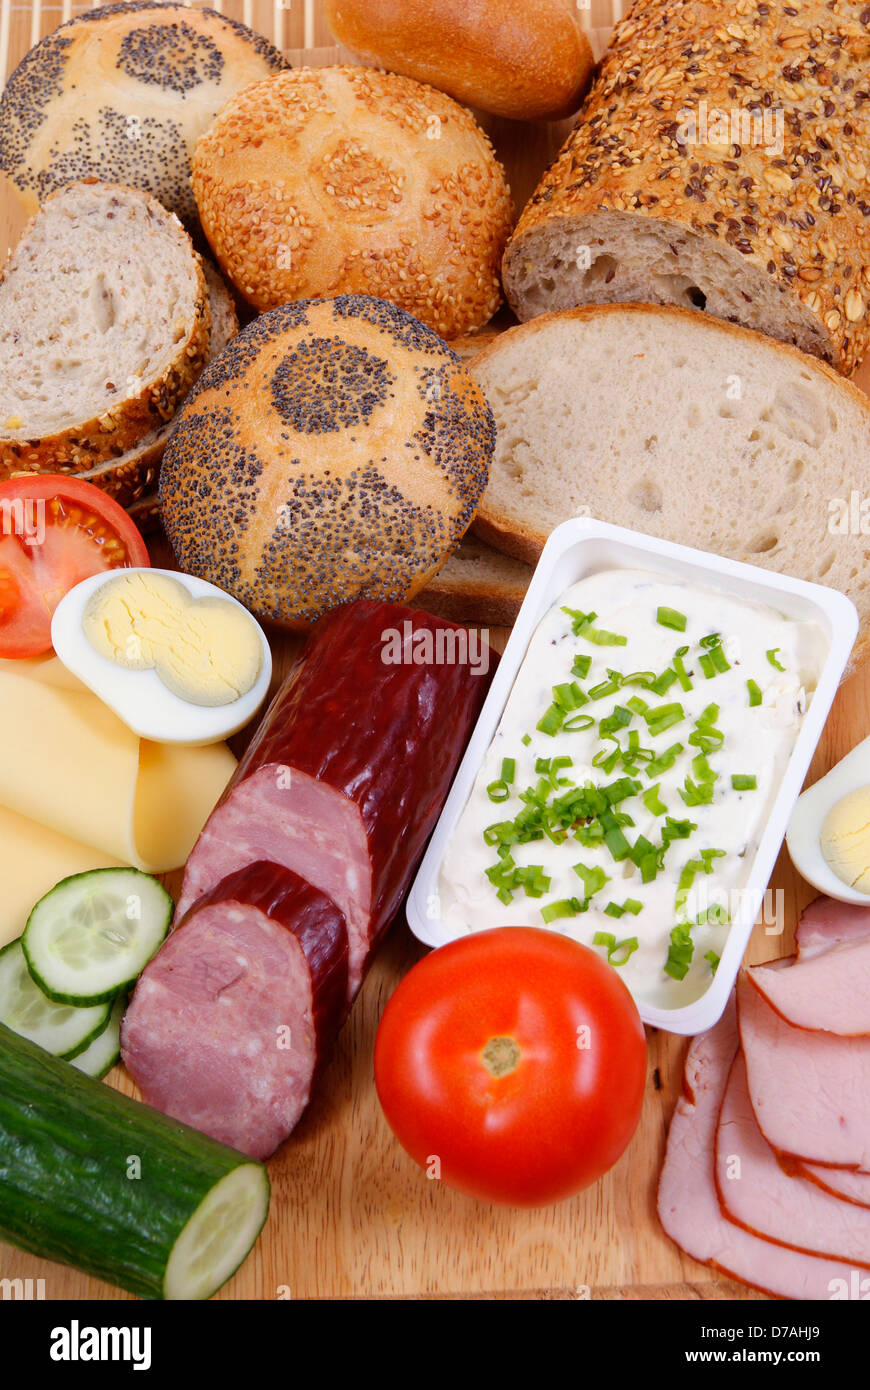 variable types of bread and products as background Stock Photo